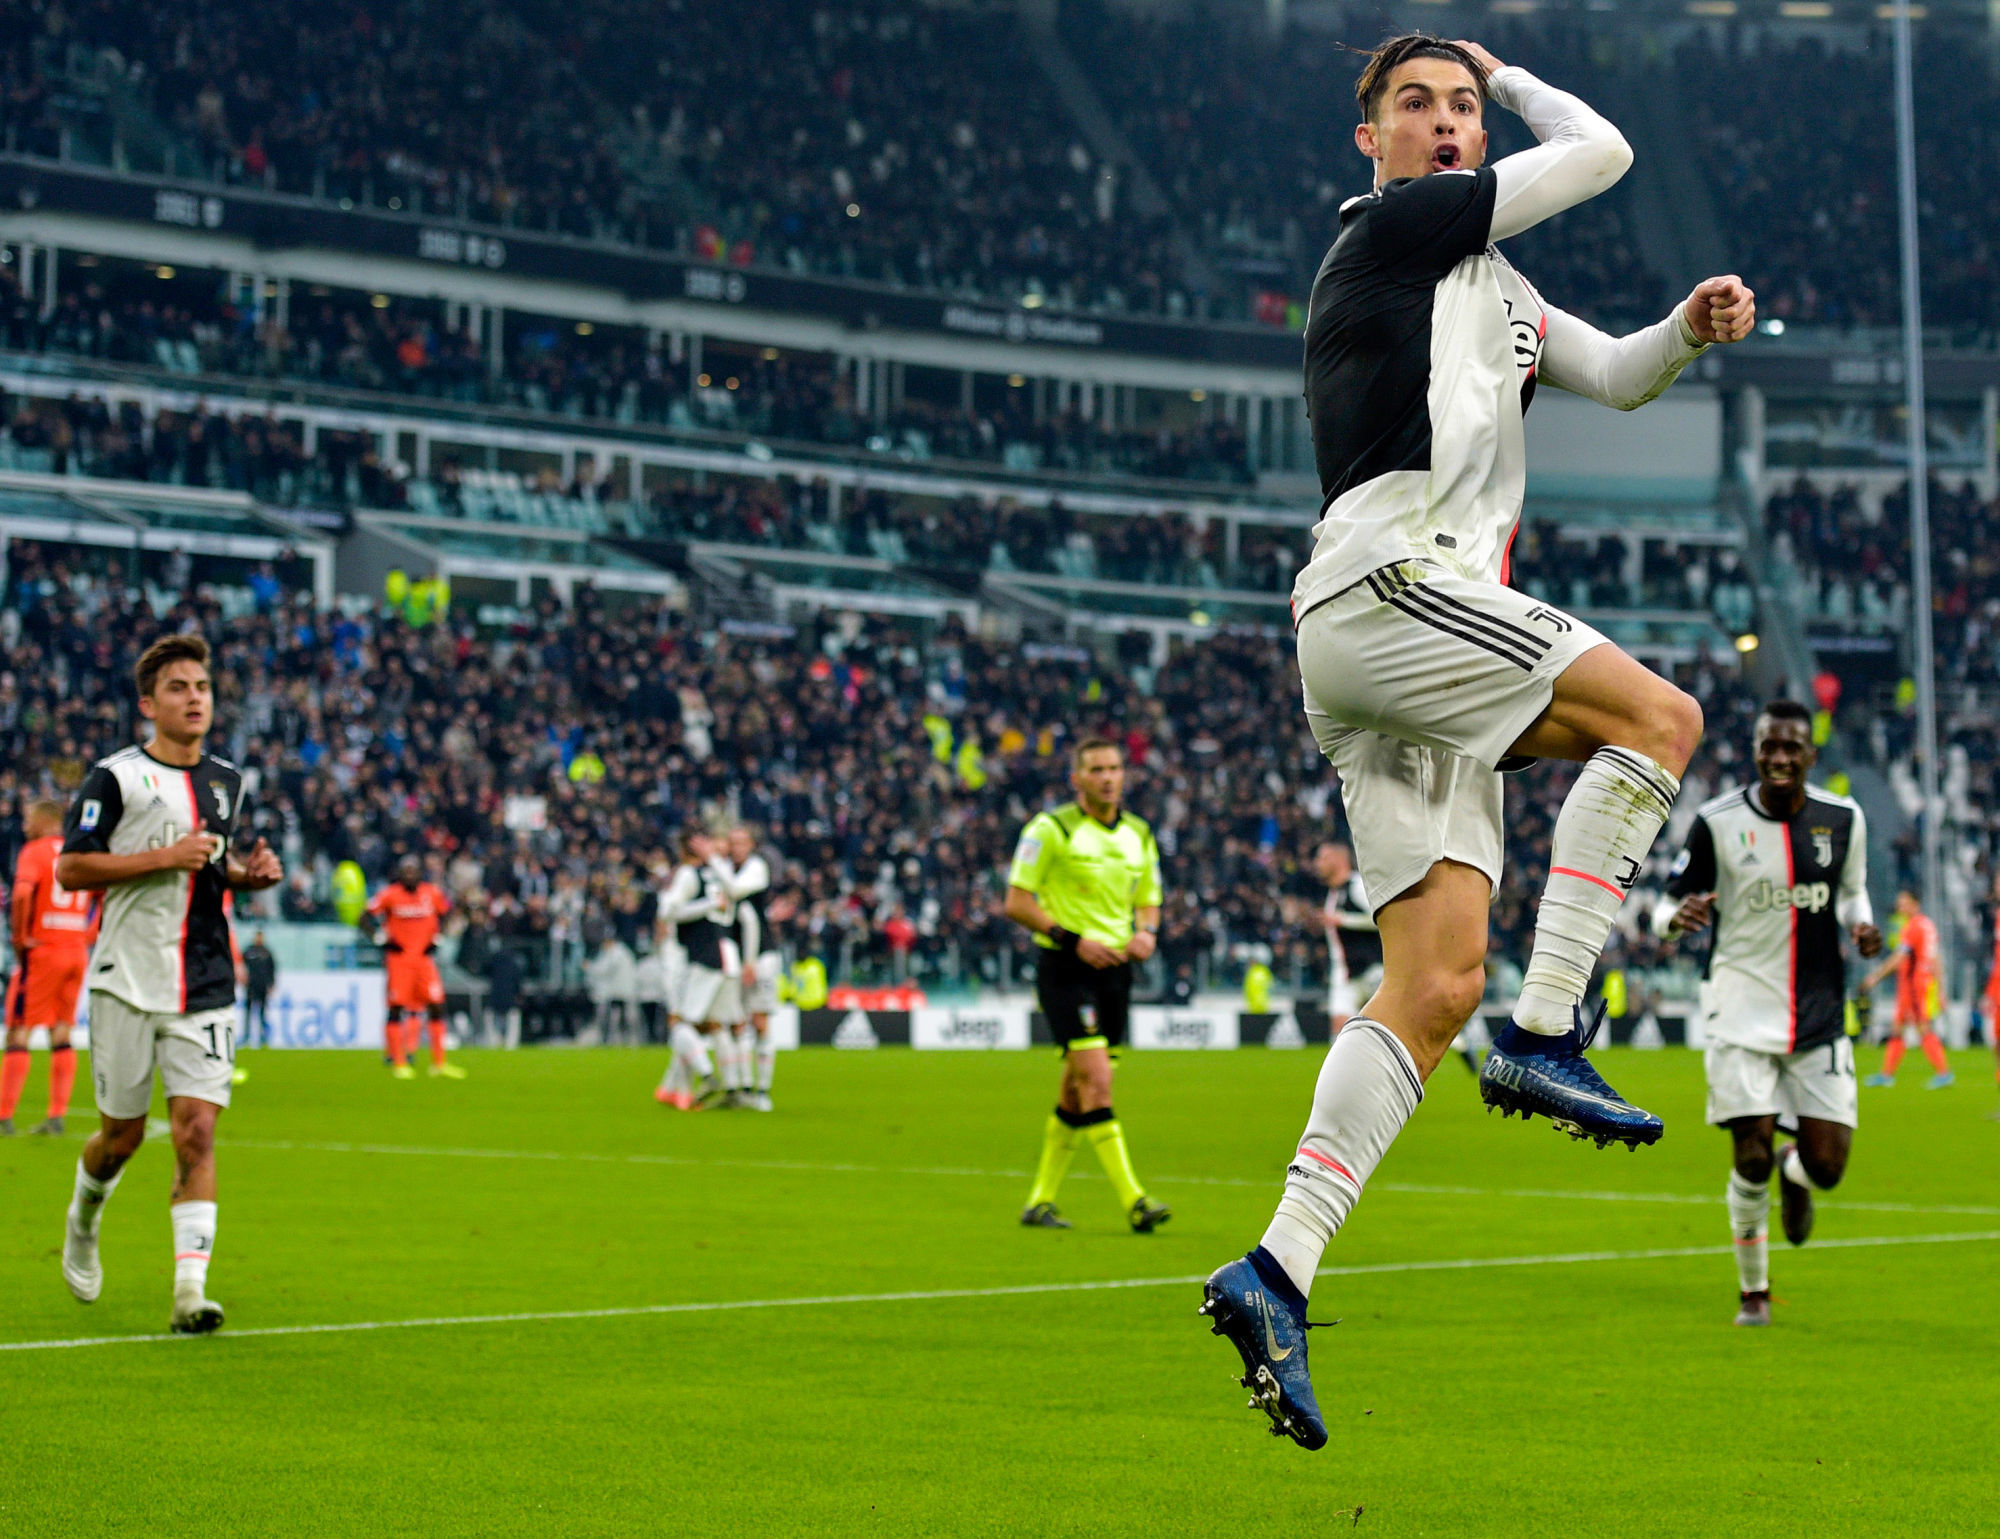 15th December 2019; Allianz Stadium, Turin, Italy; Serie A Football, Juventus versus Udinese; Cristiano Ronaldo of Juventus celebrates after scoring the goal for 2-0 in the 37th minute - Editorial Use 

Photo by Icon Sport - Allianz Stadium - Turin (Italie)